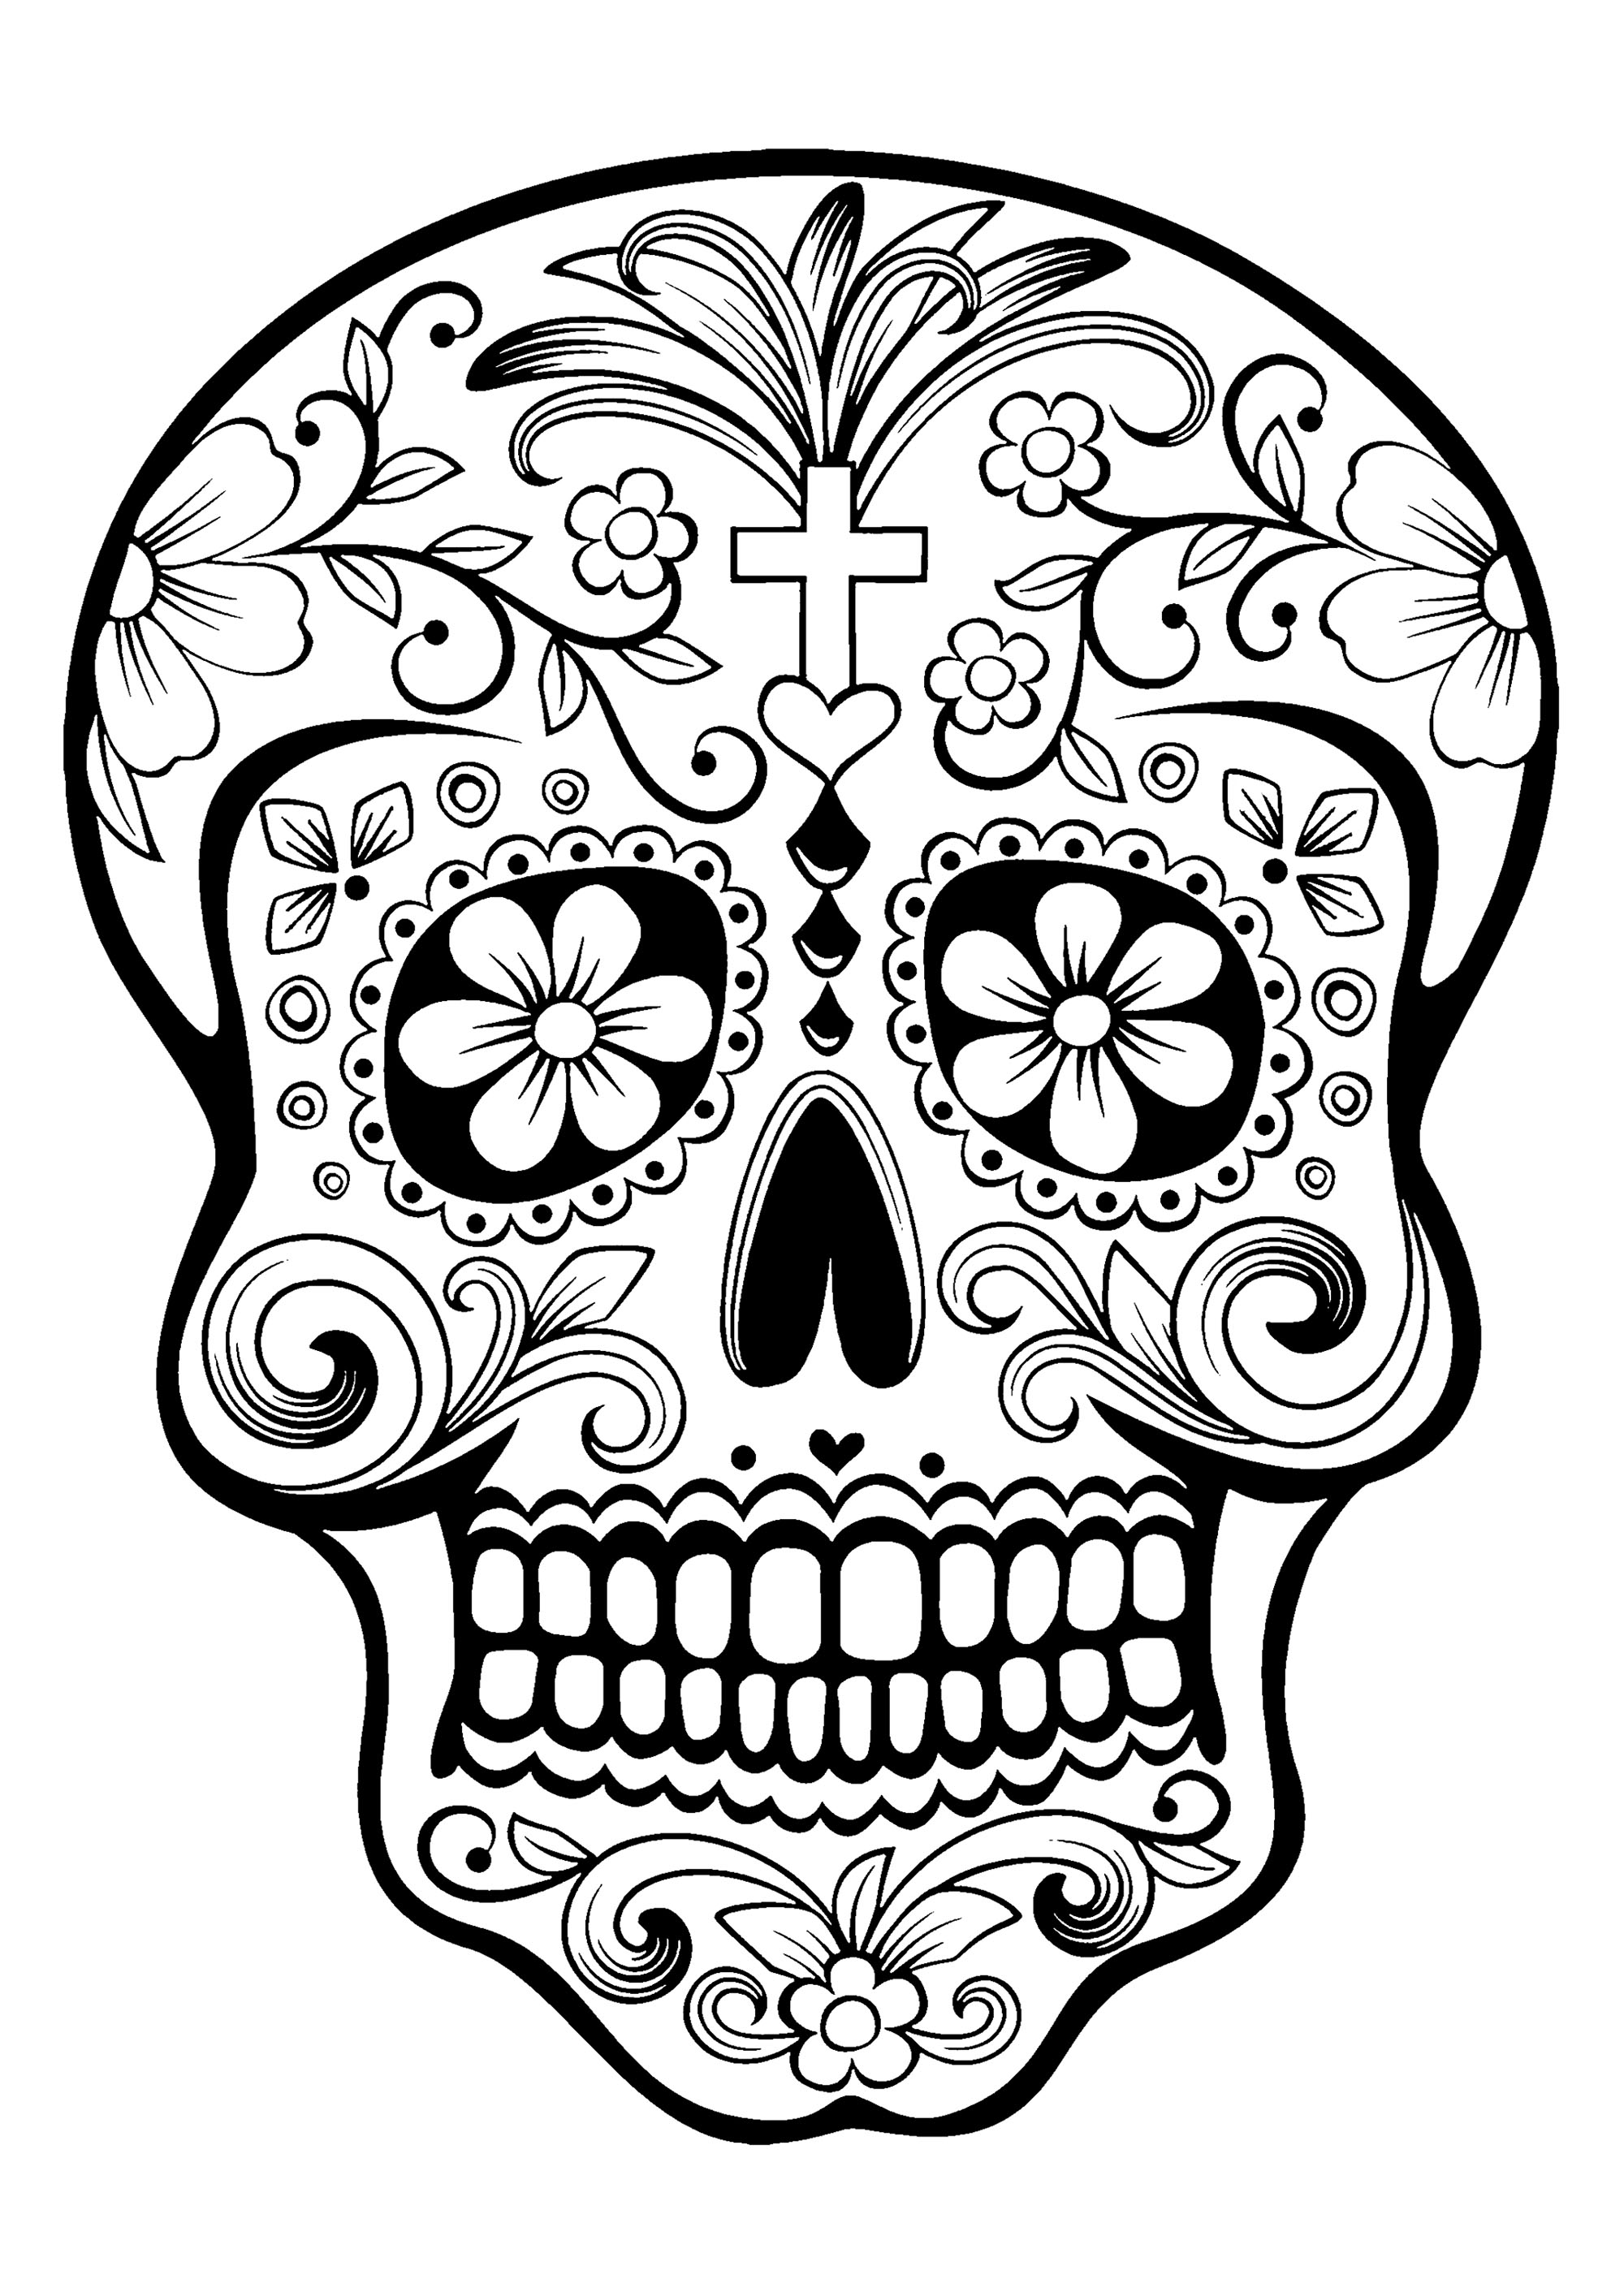 Skull Coloring Pages for Adults